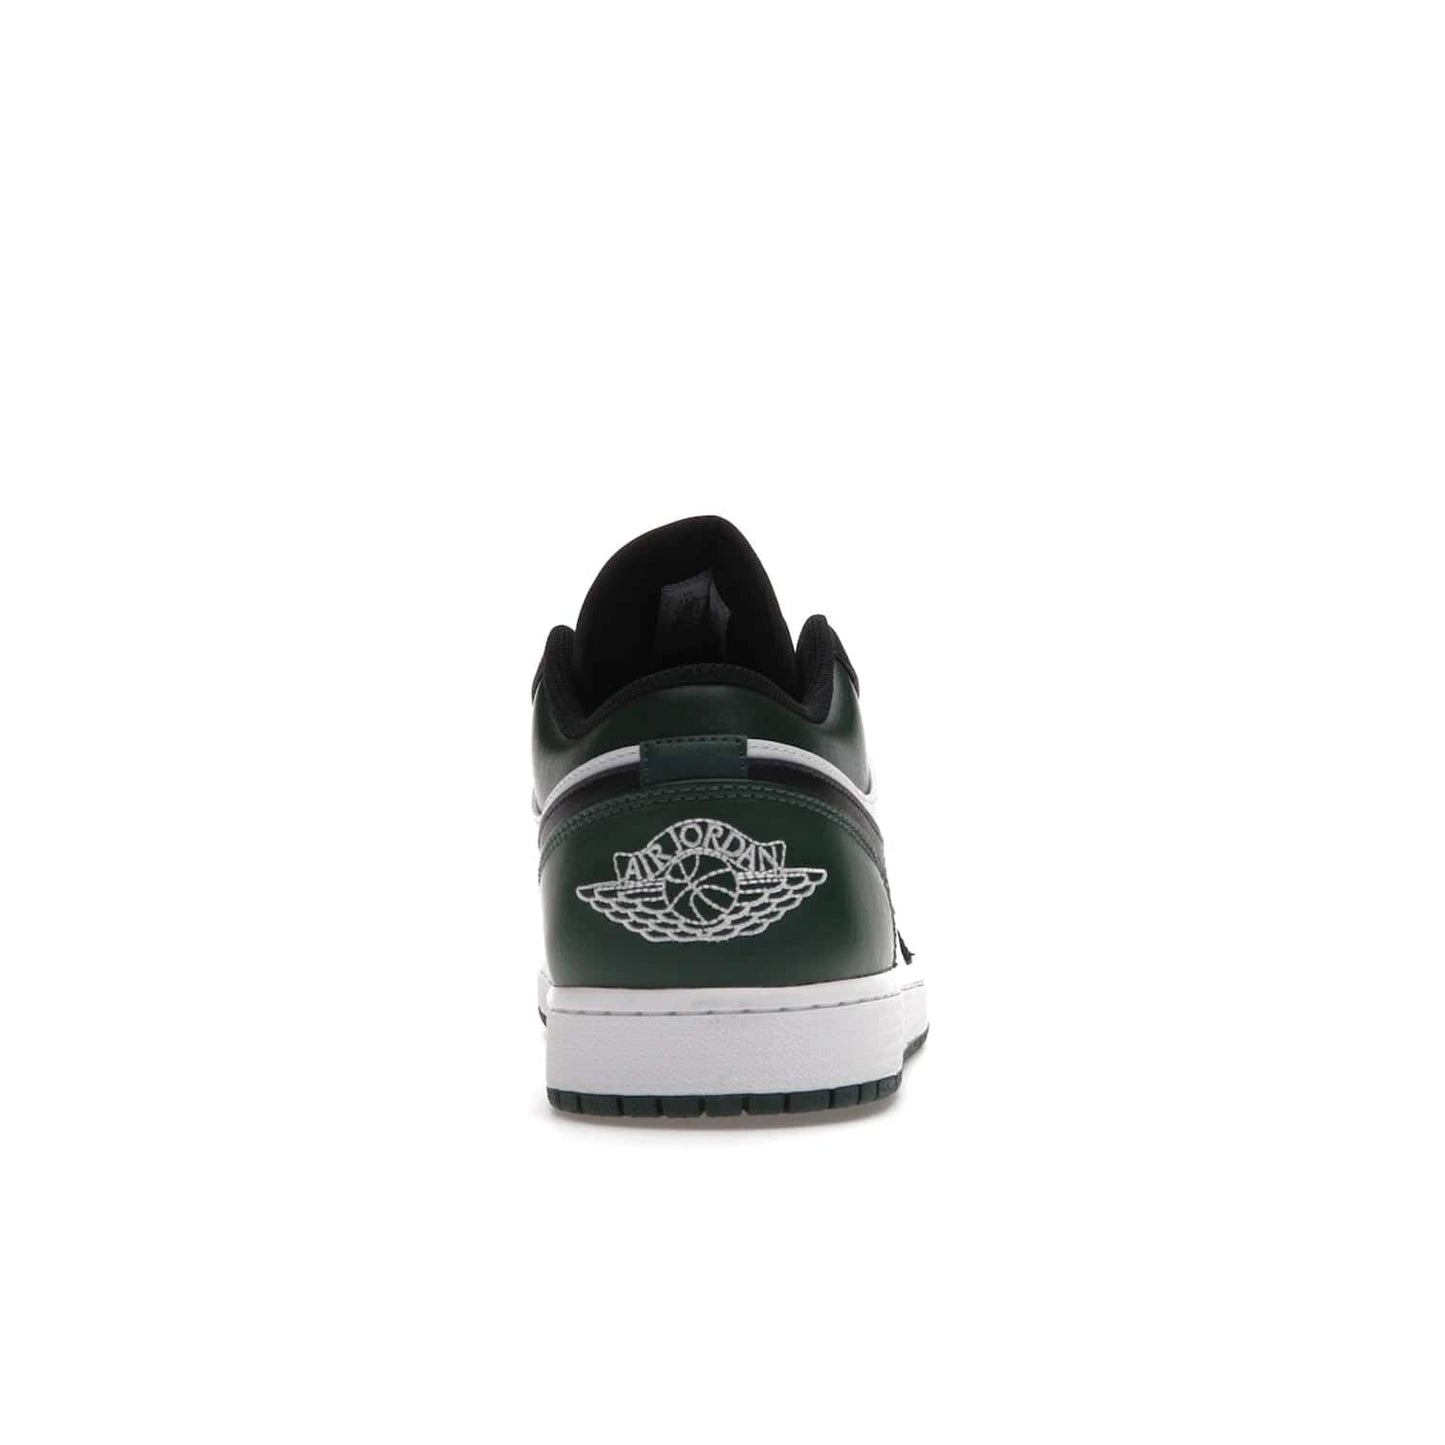 Jordan 1 Low Green Toe - Image 28 - Only at www.BallersClubKickz.com - The Jordan 1 Low Green Toe features white, black and Noble Green leather with black Swoosh. Get the classic Bred Toe-inspired color blocking with green perforated toe box. White and green Air sole completes the design. Released in October 2021 at only $100. Grab your pair now!